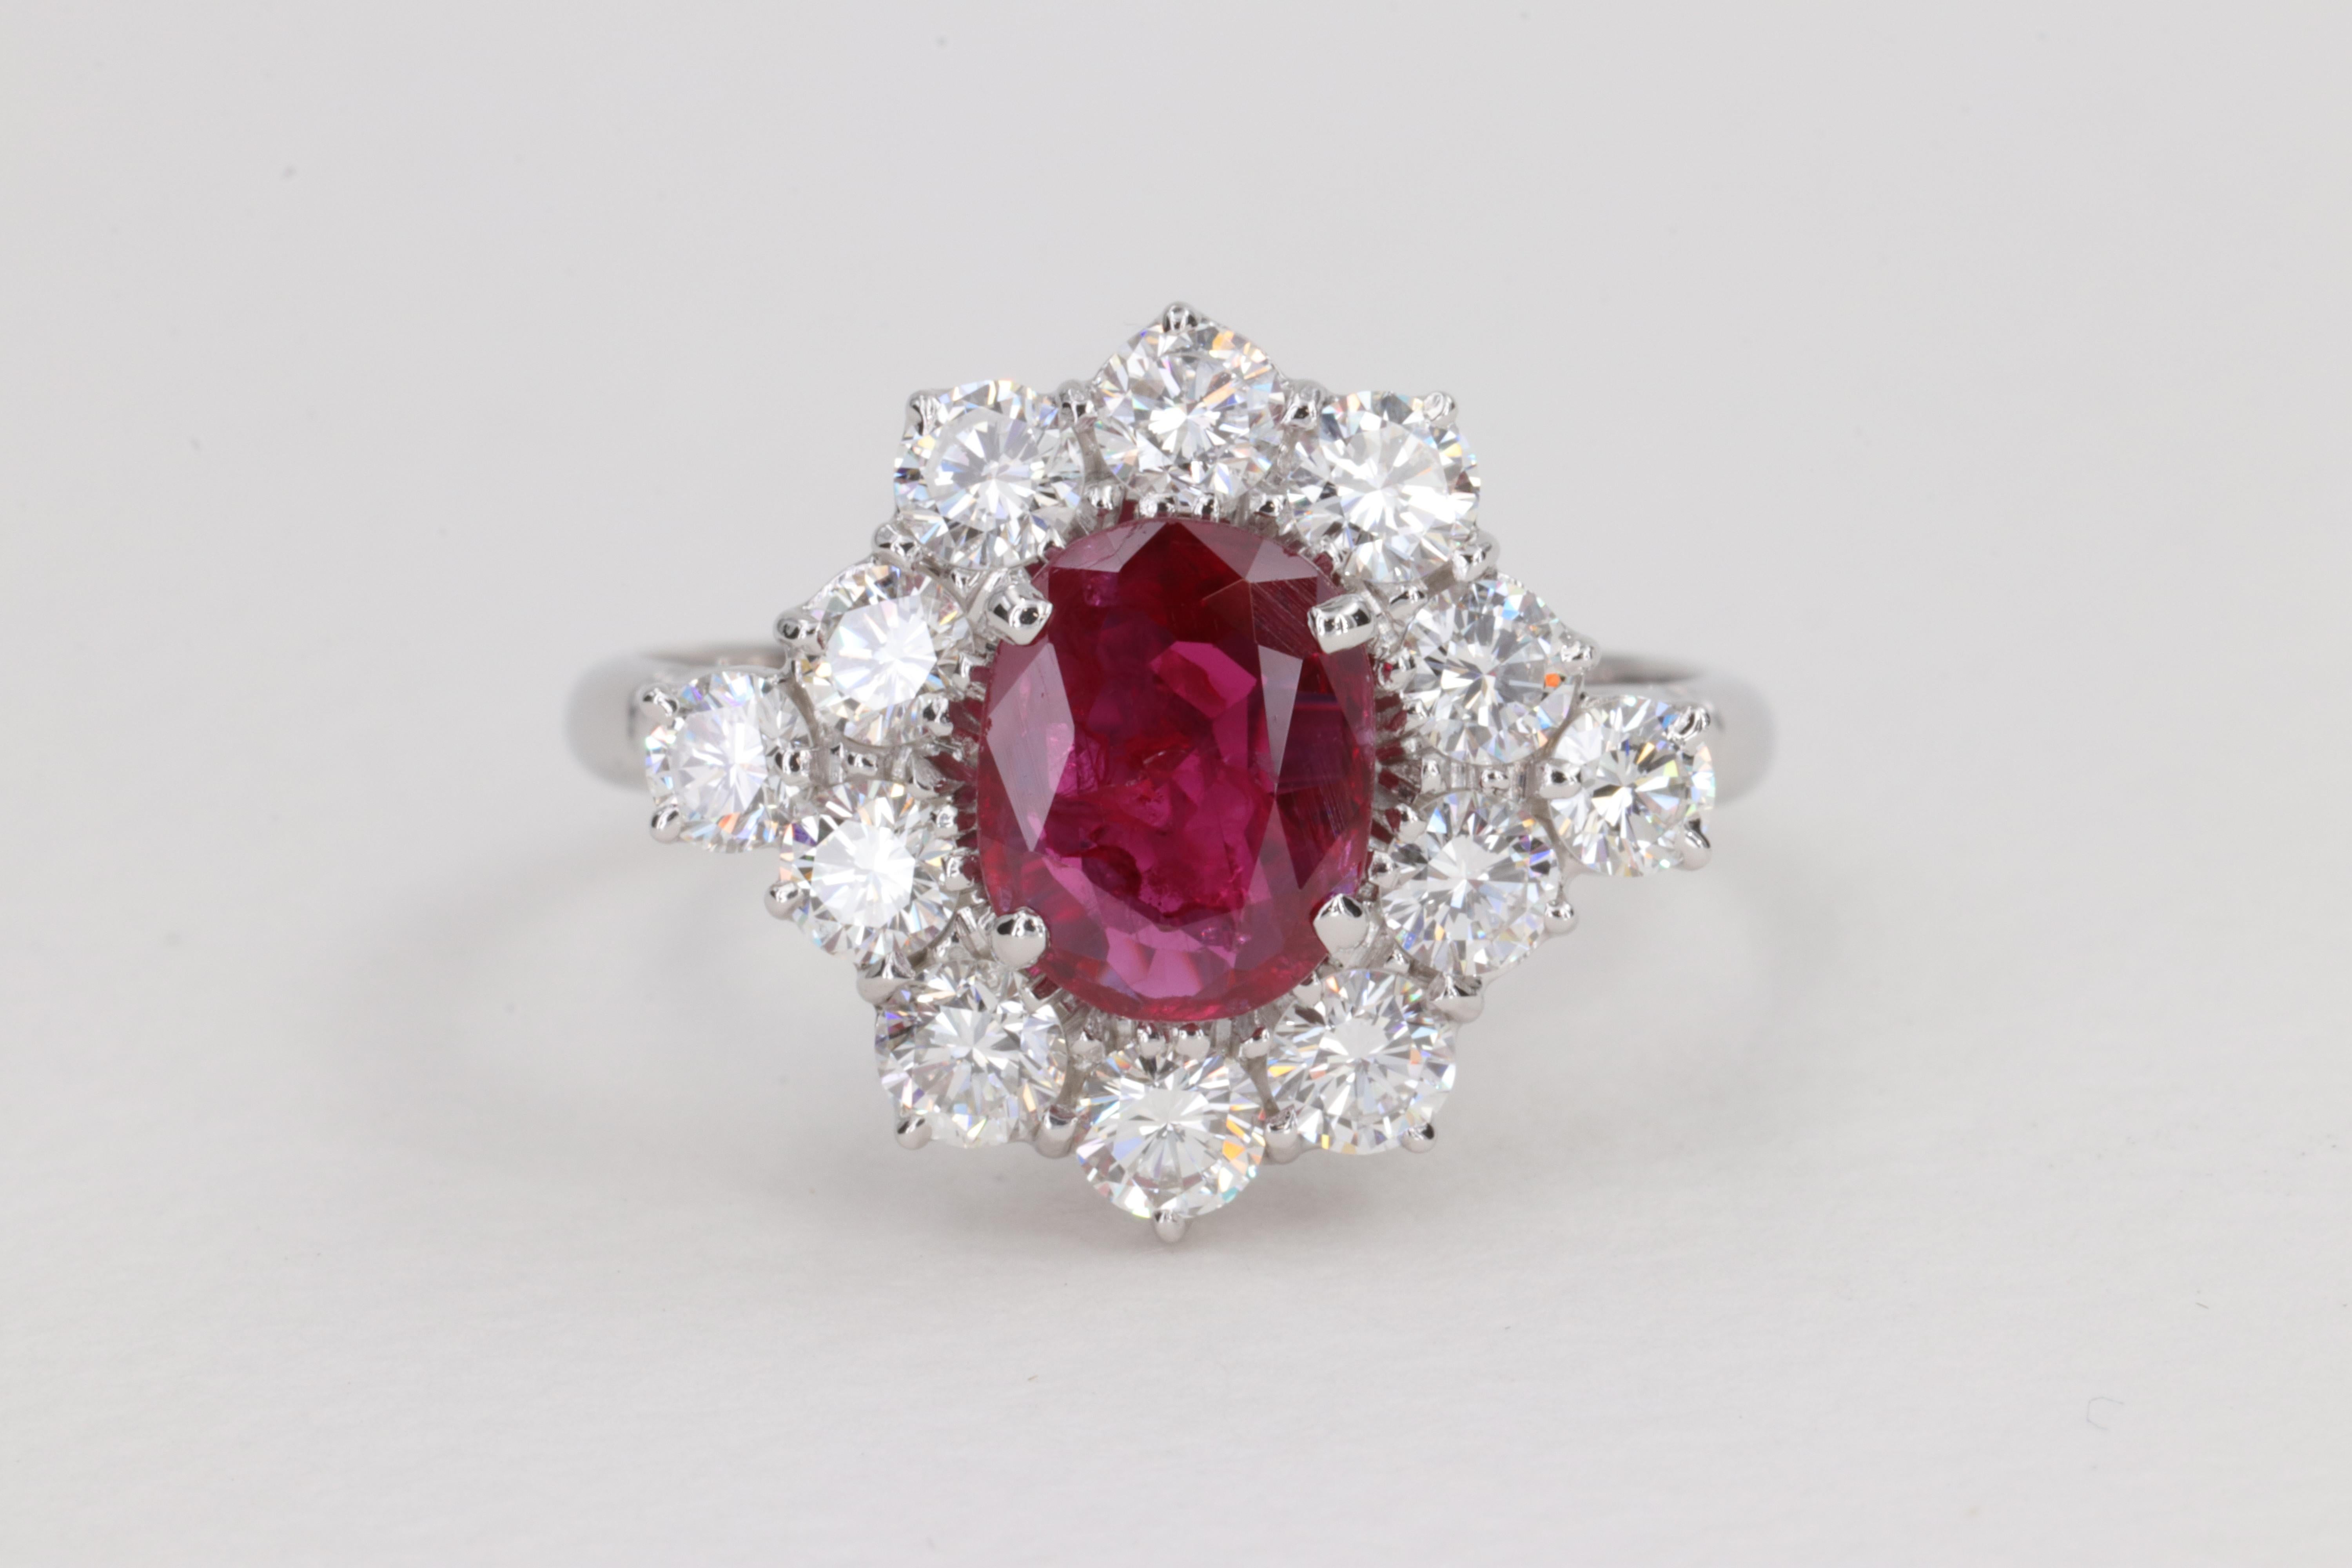 G.I.A. Vivid Red Ruby and Diamond Halo Handmade Ring
 
Ruby - Natural

Weight - 1.16 Carats 
Measurements - 7.78 x 6.13 x 2.61
Shape - Oval 
Treatment - Heated
Origin - Thailand
G.I.A. Report # 1226483504

Ring:

Diamonds - Natural - 12 Round